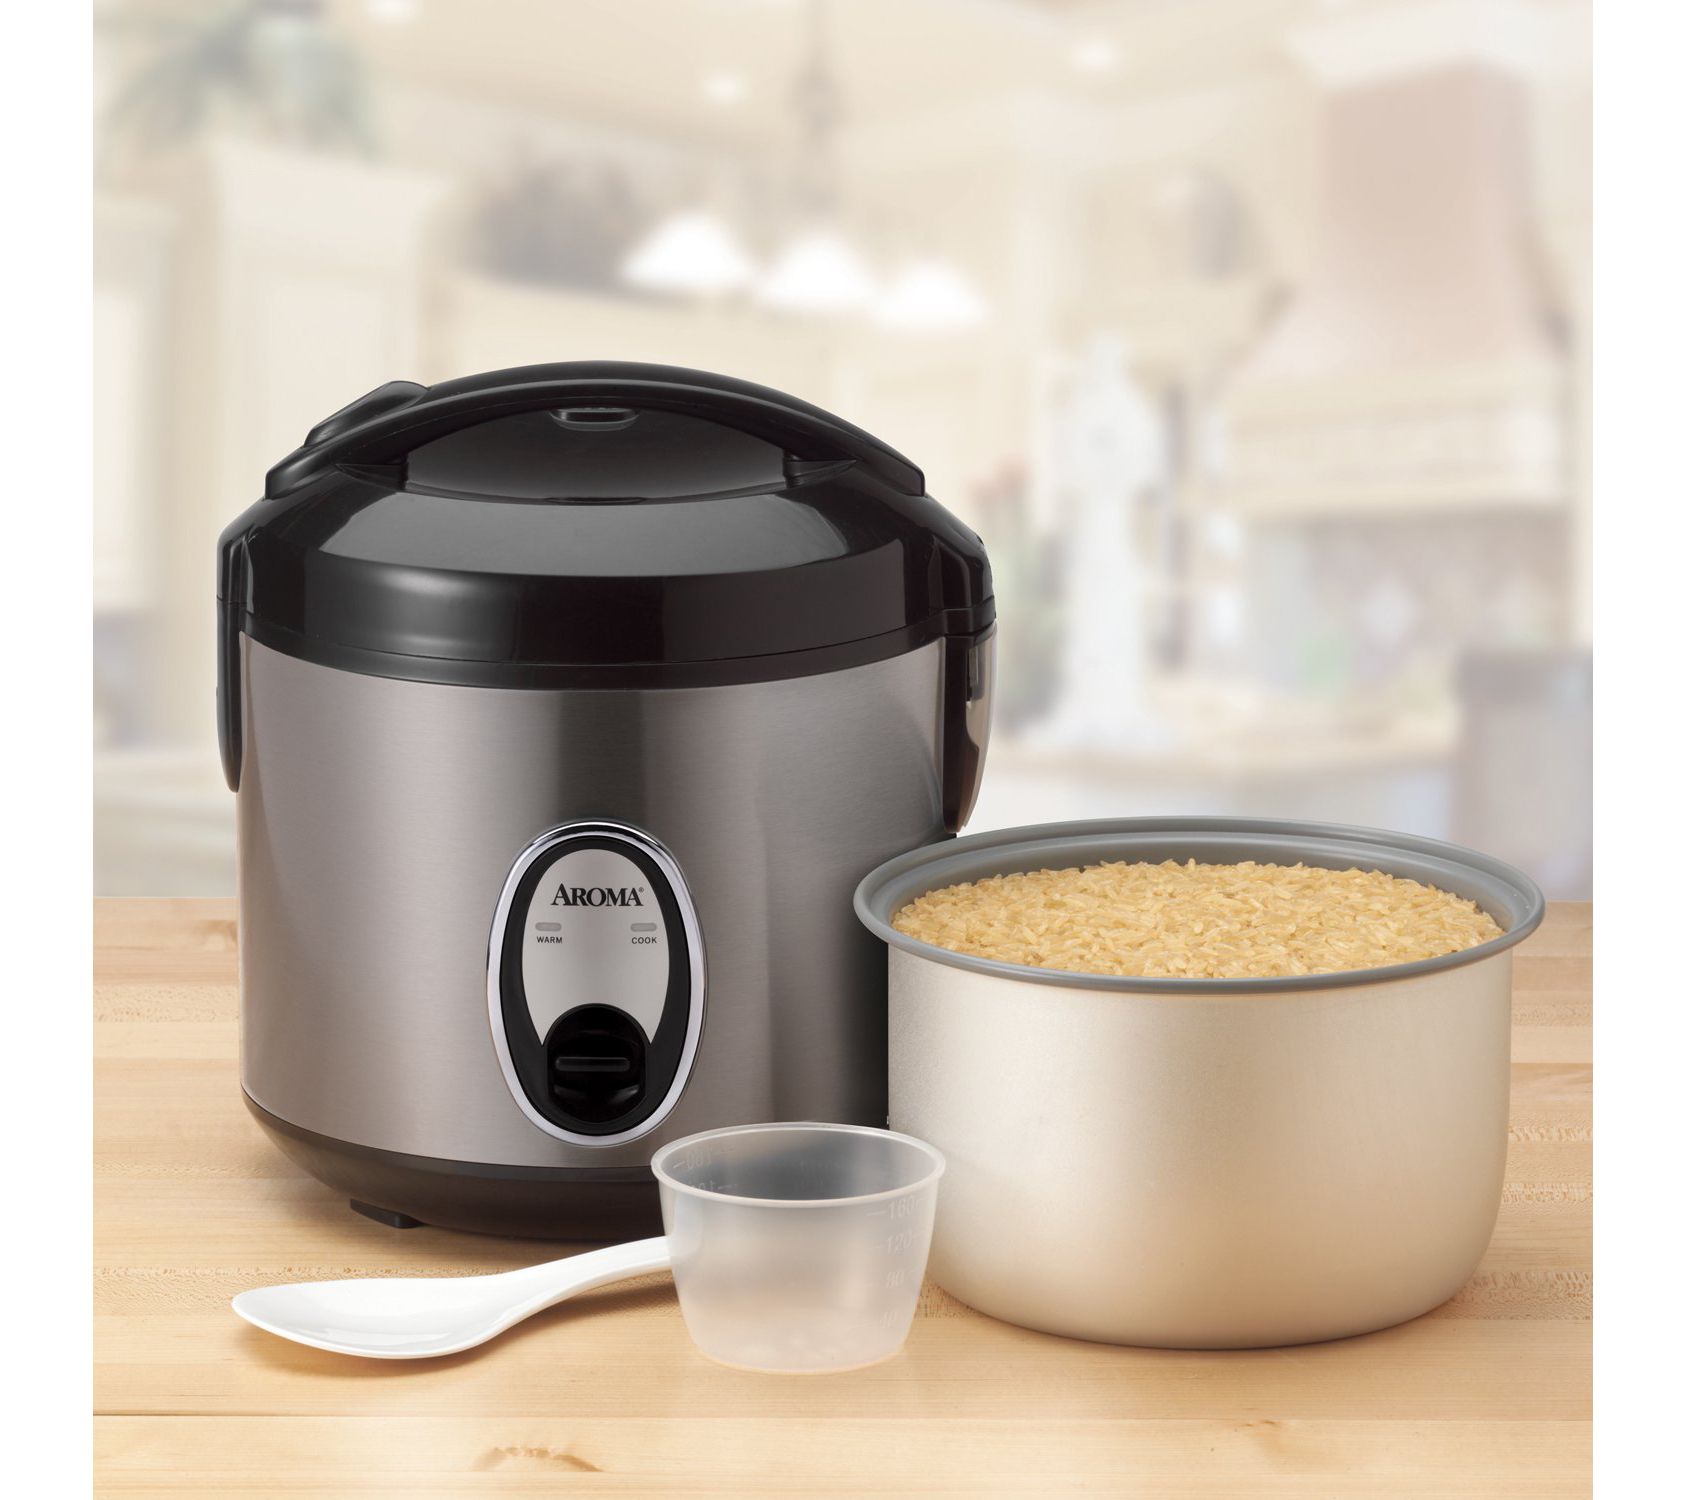 our goods Rice Cooker & Food Steamer - Pebble Gray